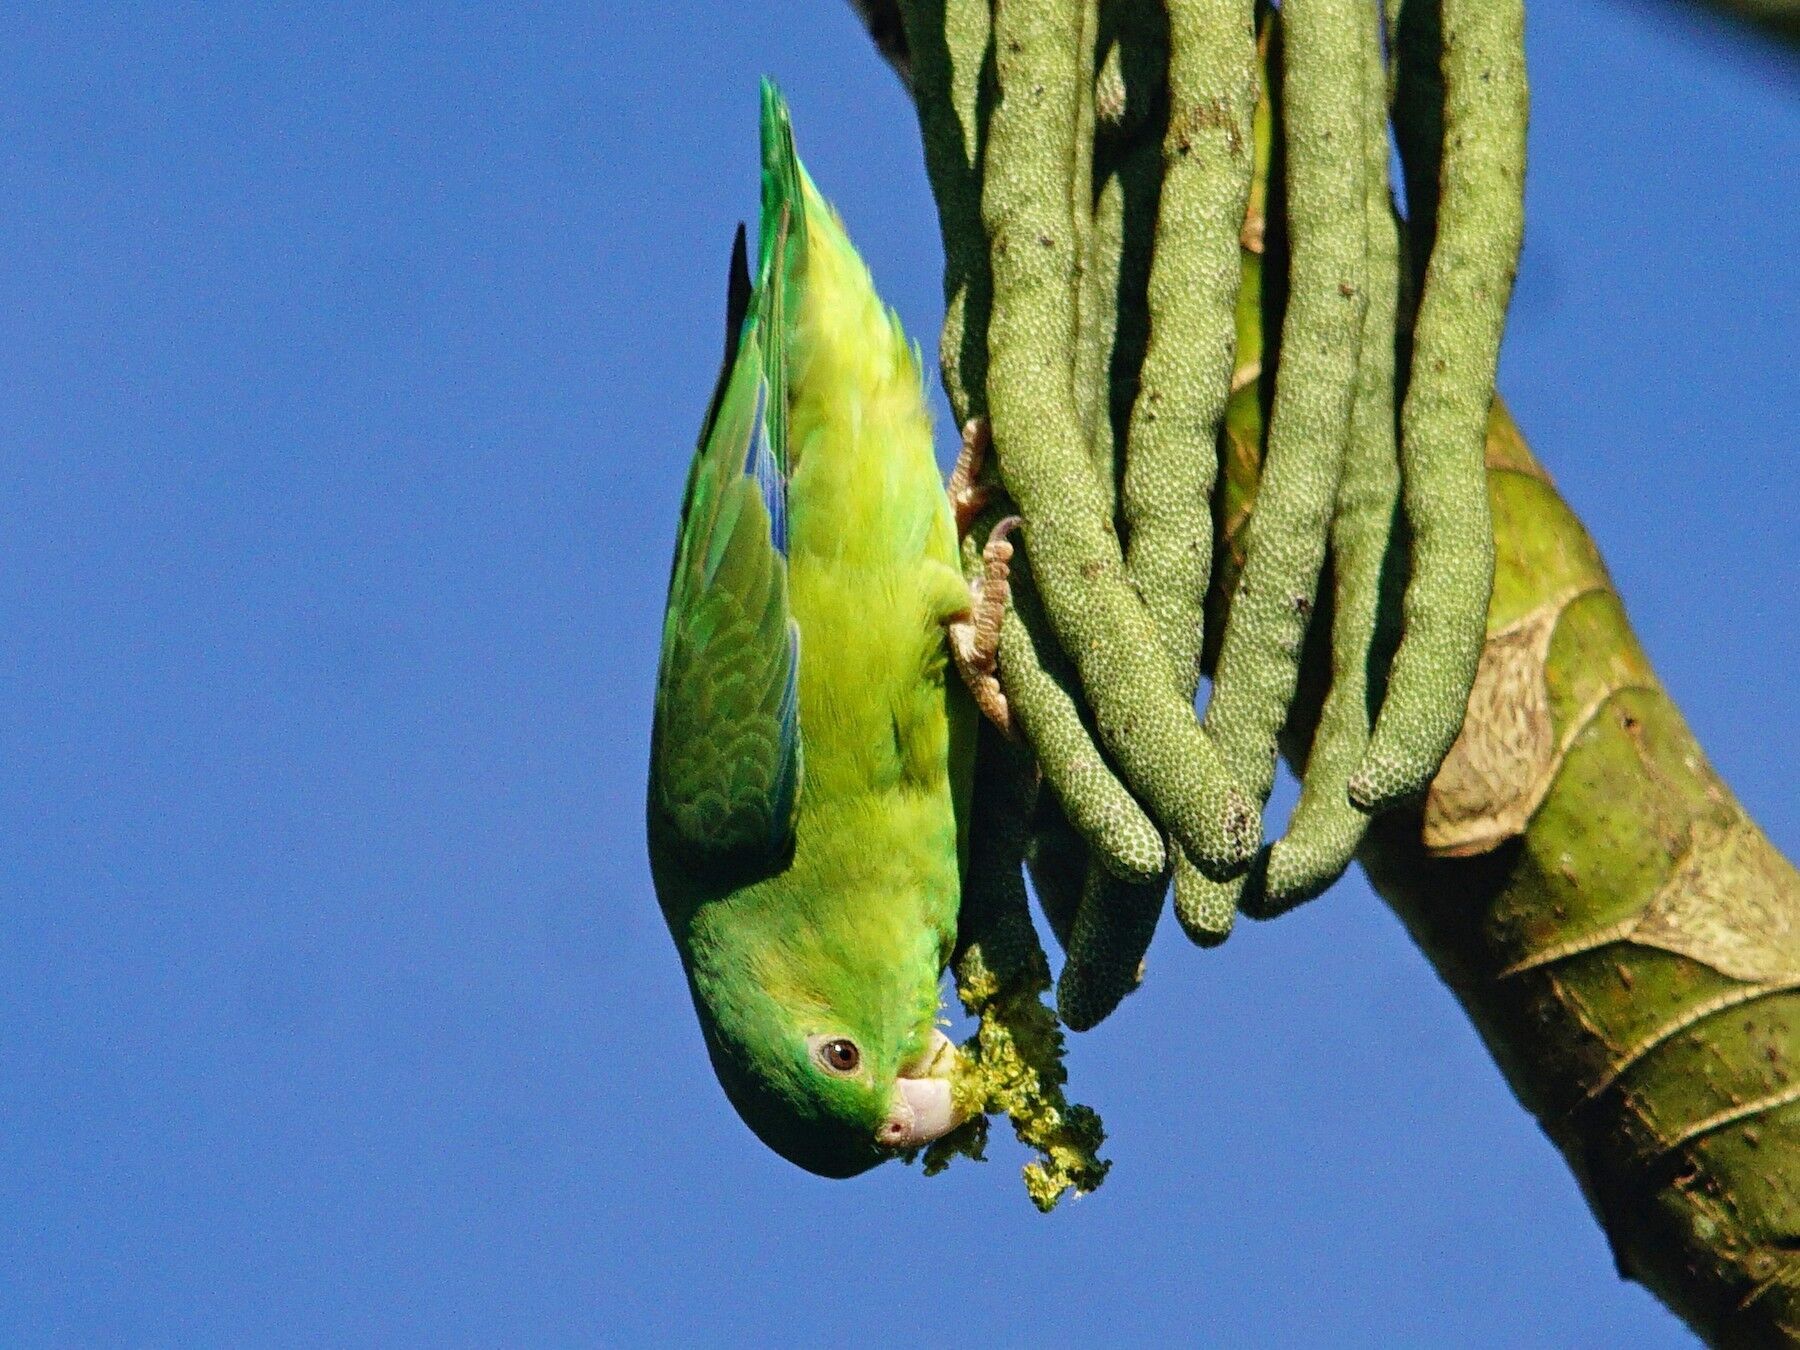 End of lifelong mystery: it took scientists 27 years to figure out why parrots kill and adopt each other's chicks 